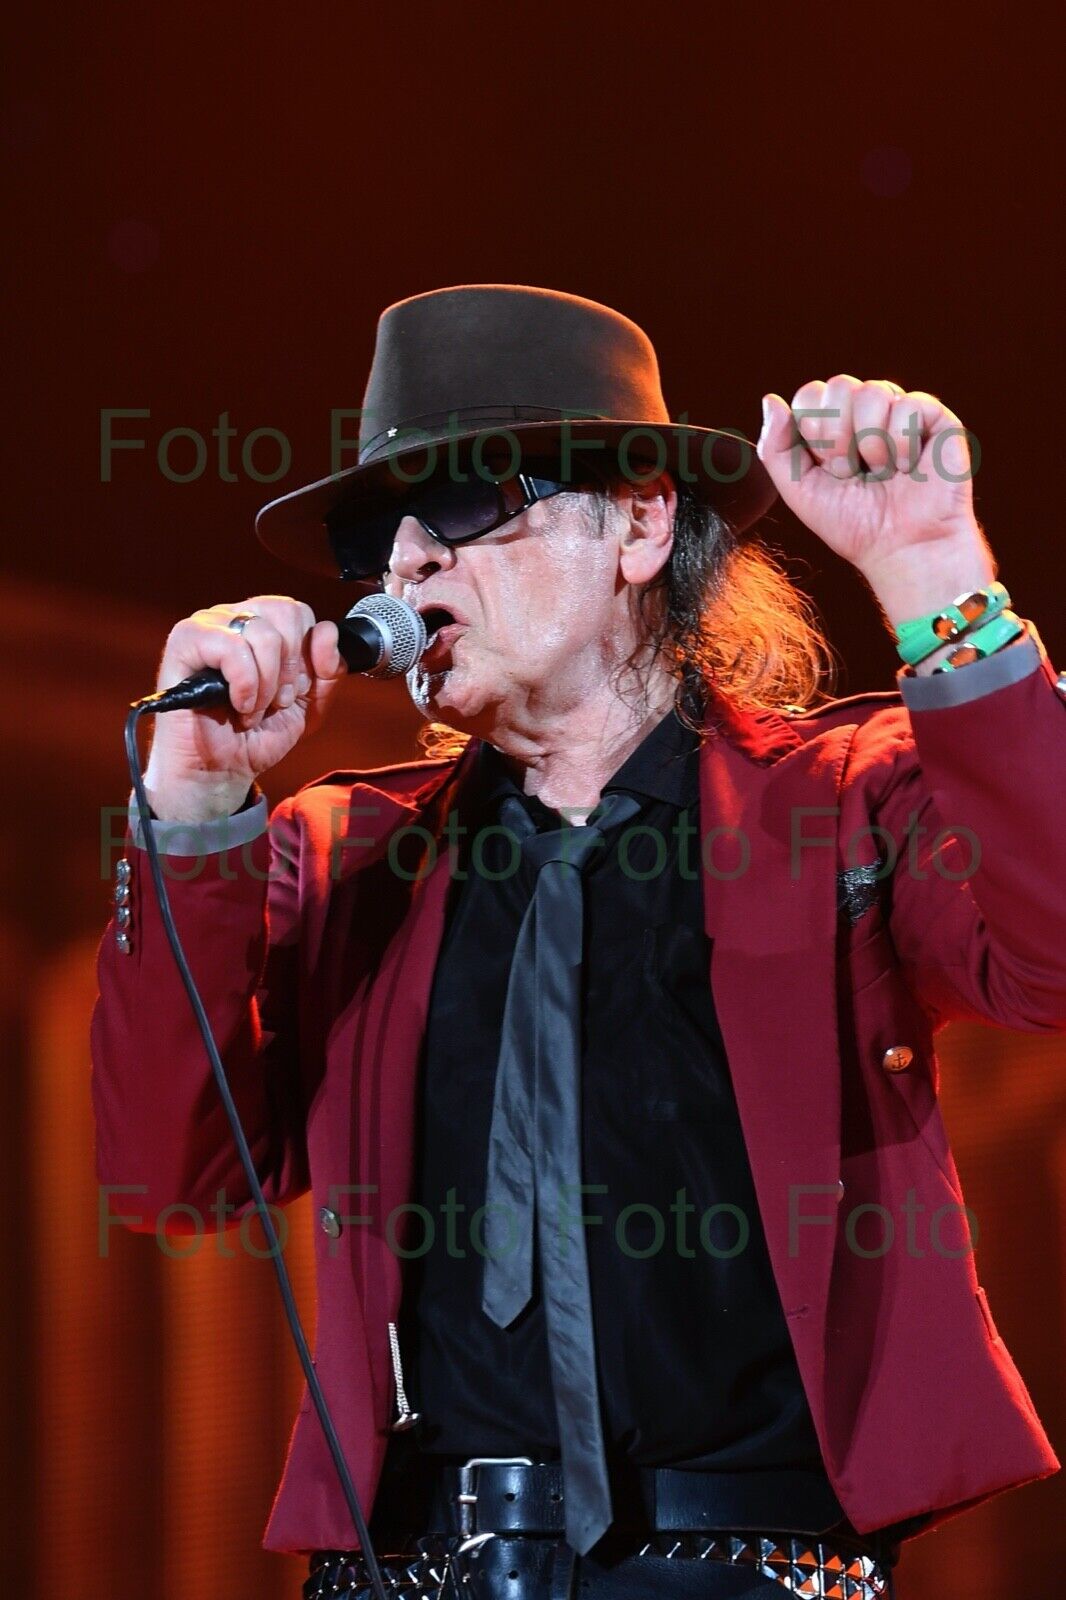 Udo Lindenberg Rock Music Painter Photo Poster painting 20 X 30 CM Without Autograph (Be-48